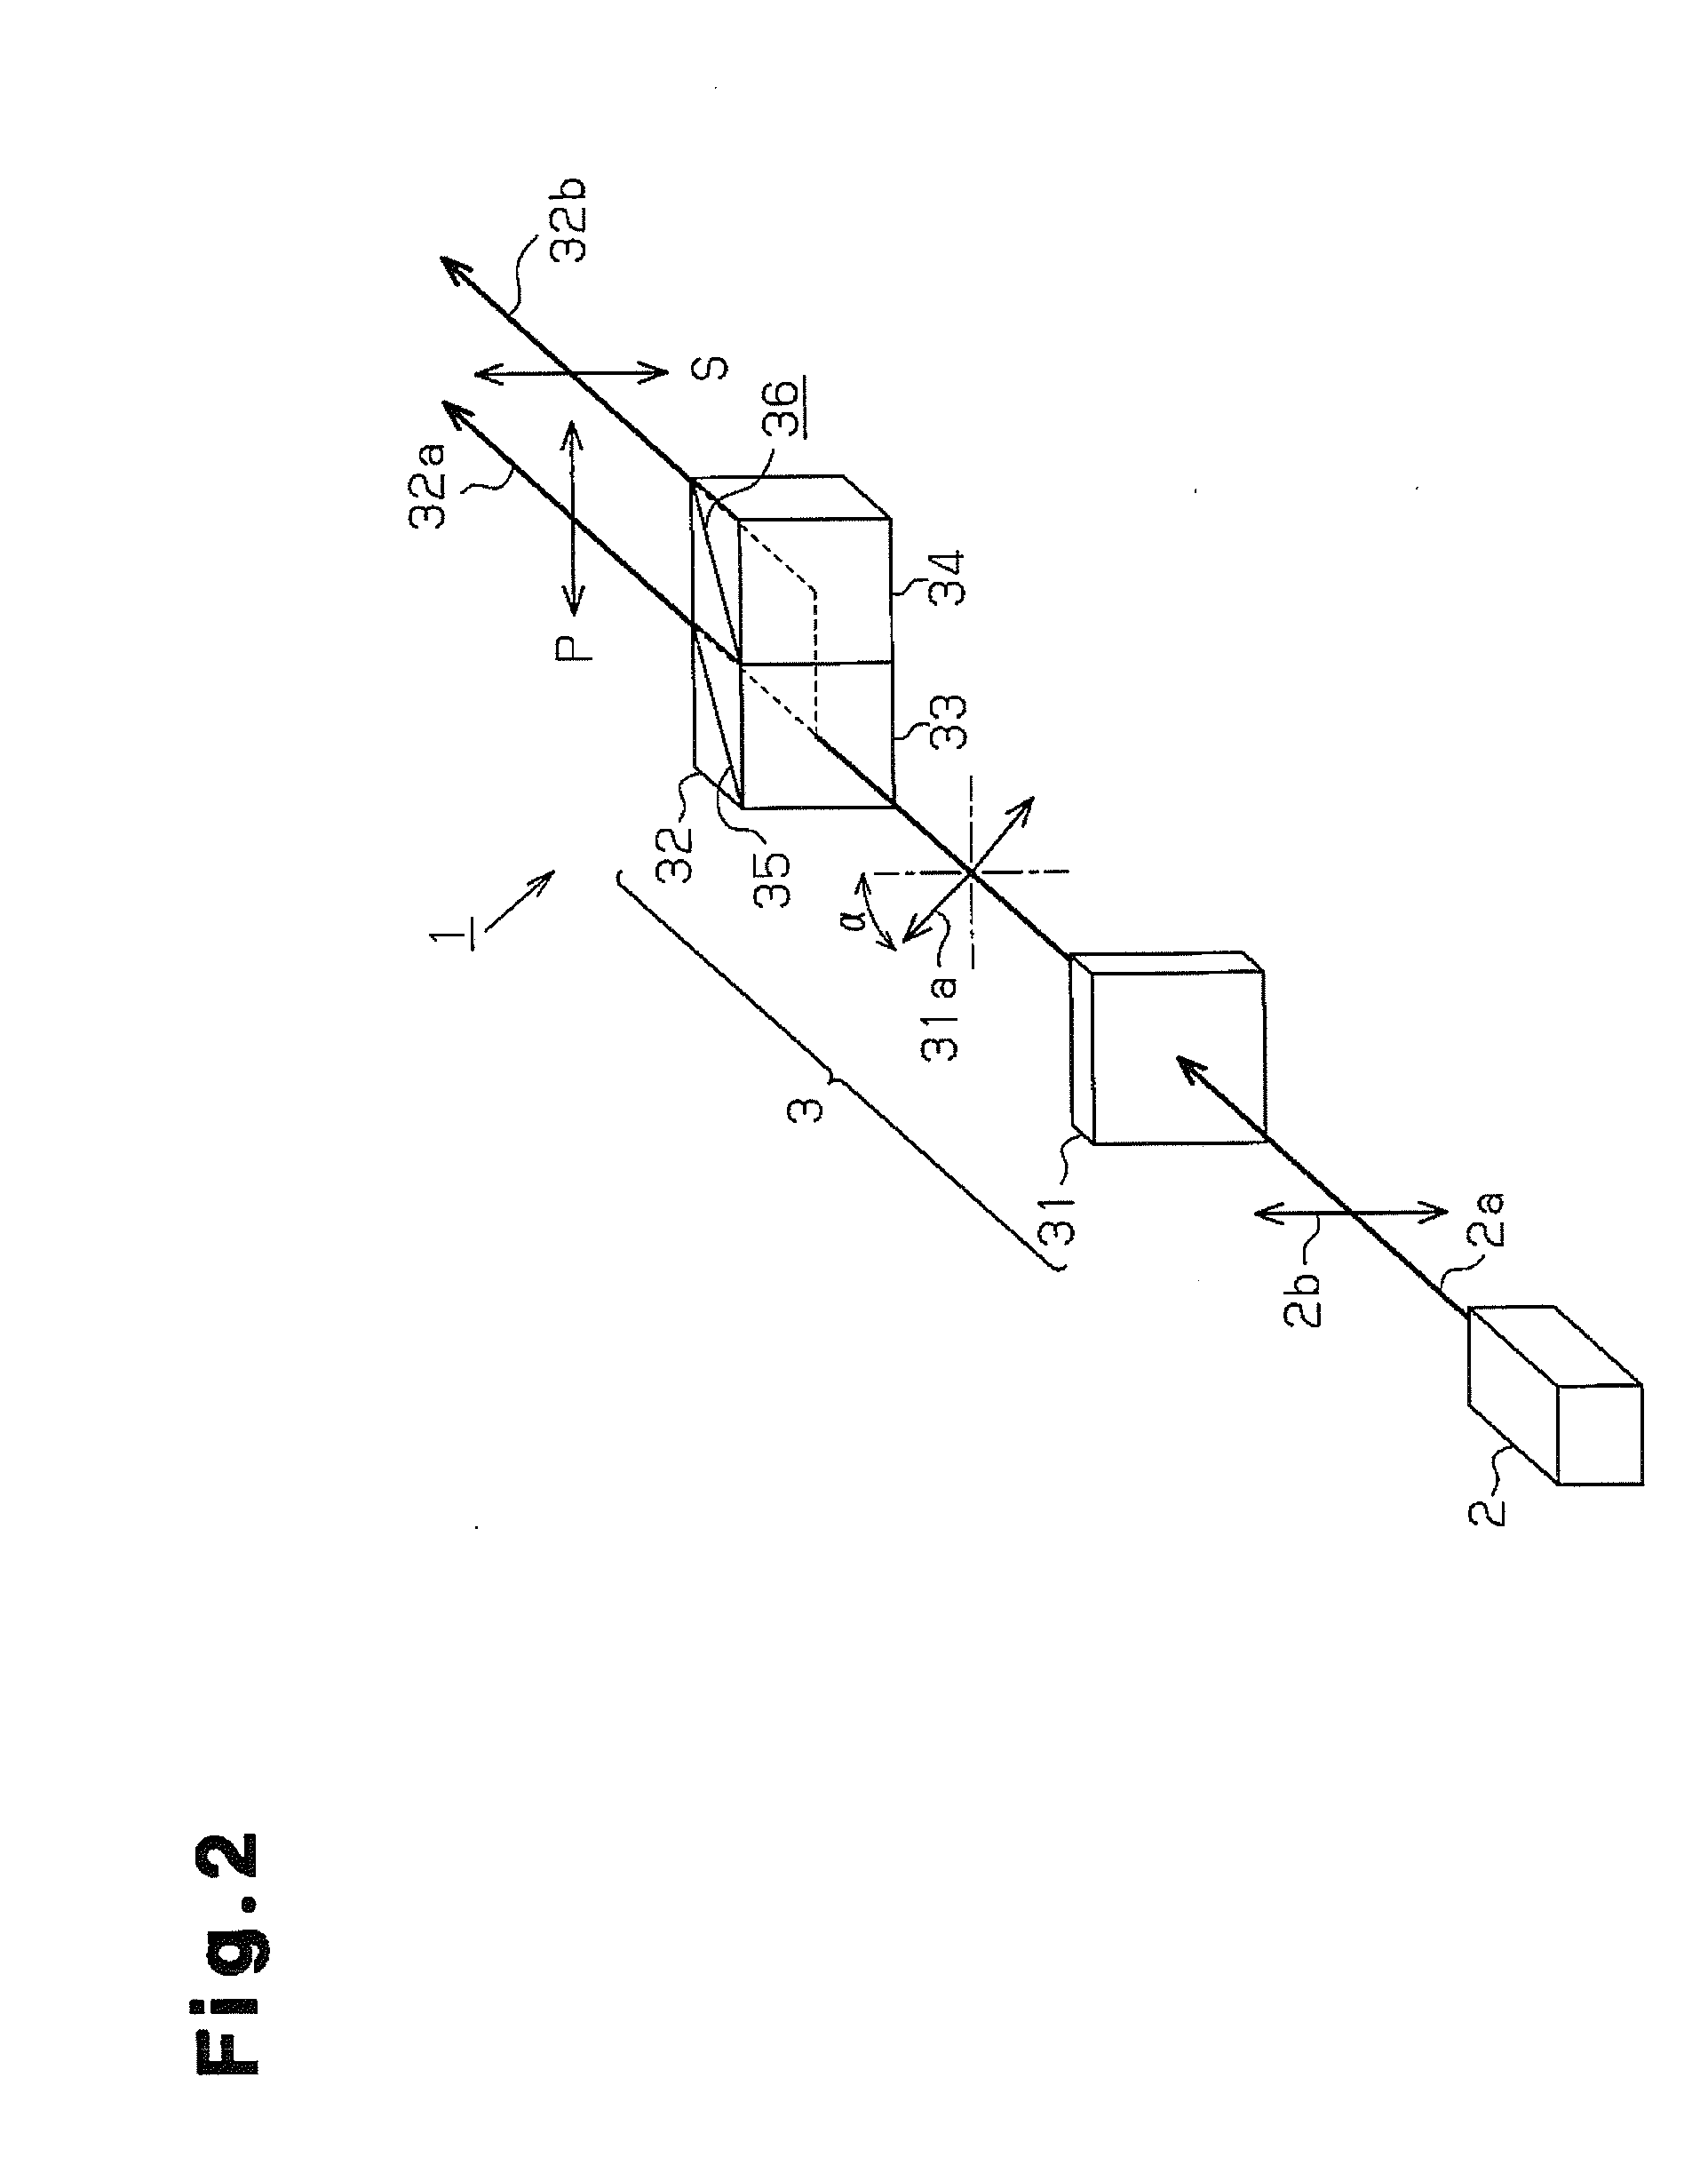 Illumination device and video projector